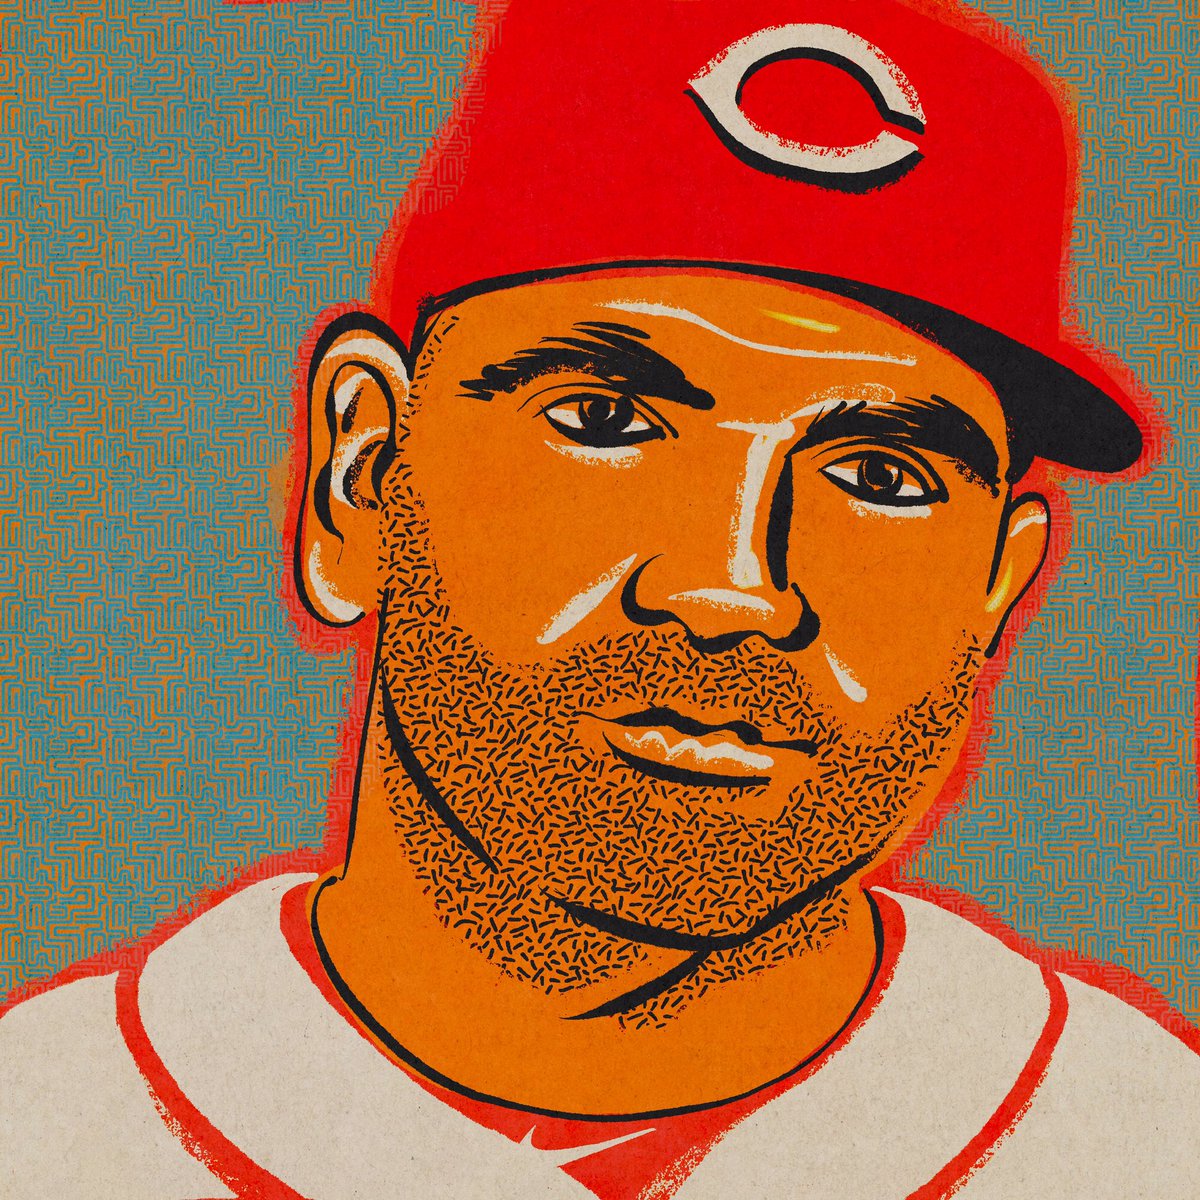 This Day in Baseball History: May 7, 2008 - Rookie Joey Votto becomes the 23rd member of the Cincinnati Reds to hit three home runs in a game.
#tripleplaydesign #iamtripleplaydesign #tpdtradingcards #design #joeyvotto #cincinnatireds #votto #baseballcards #baseball #mlb #topps